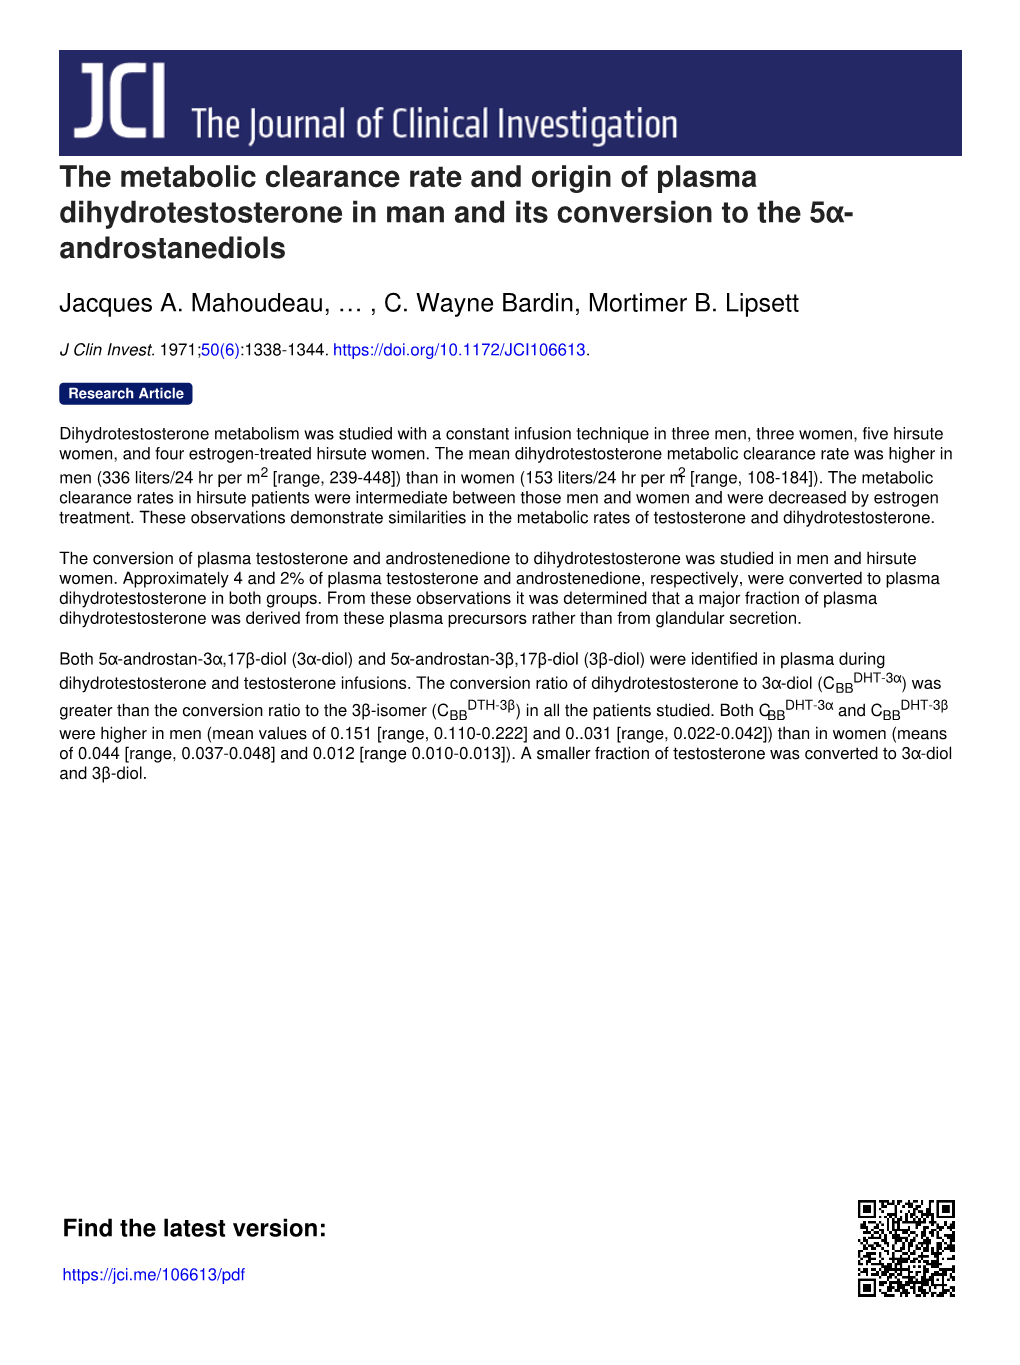 The Metabolic Clearance Rate and Origin of Plasma Dihydrotestosterone in Man and Its Conversion to the 5Α- Androstanediols